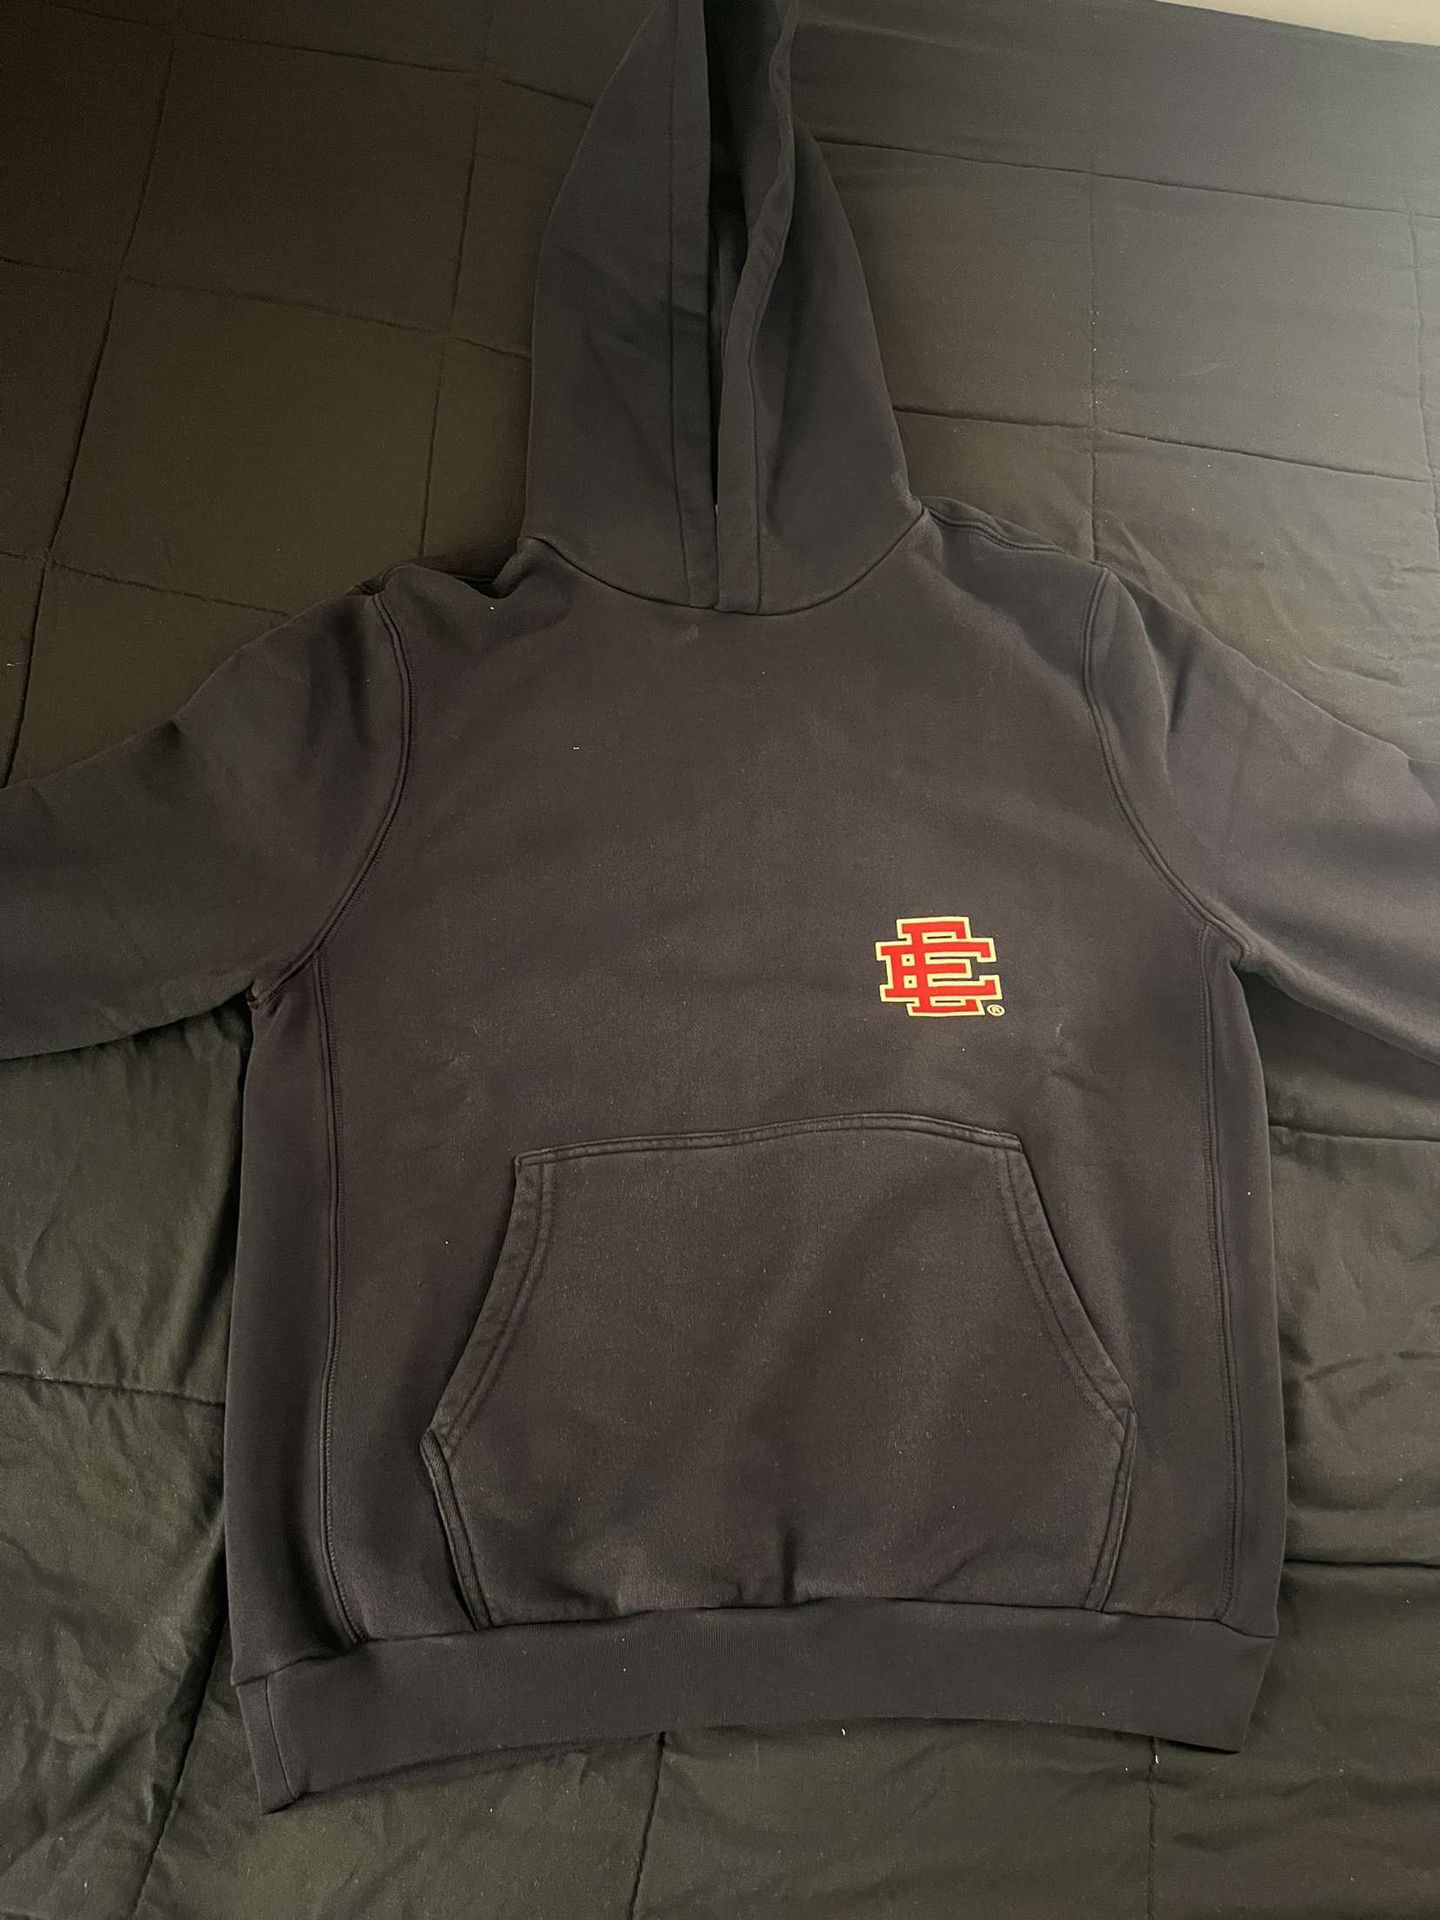 Amiri Paint Drip Hoodie for Sale in Queens, NY - OfferUp